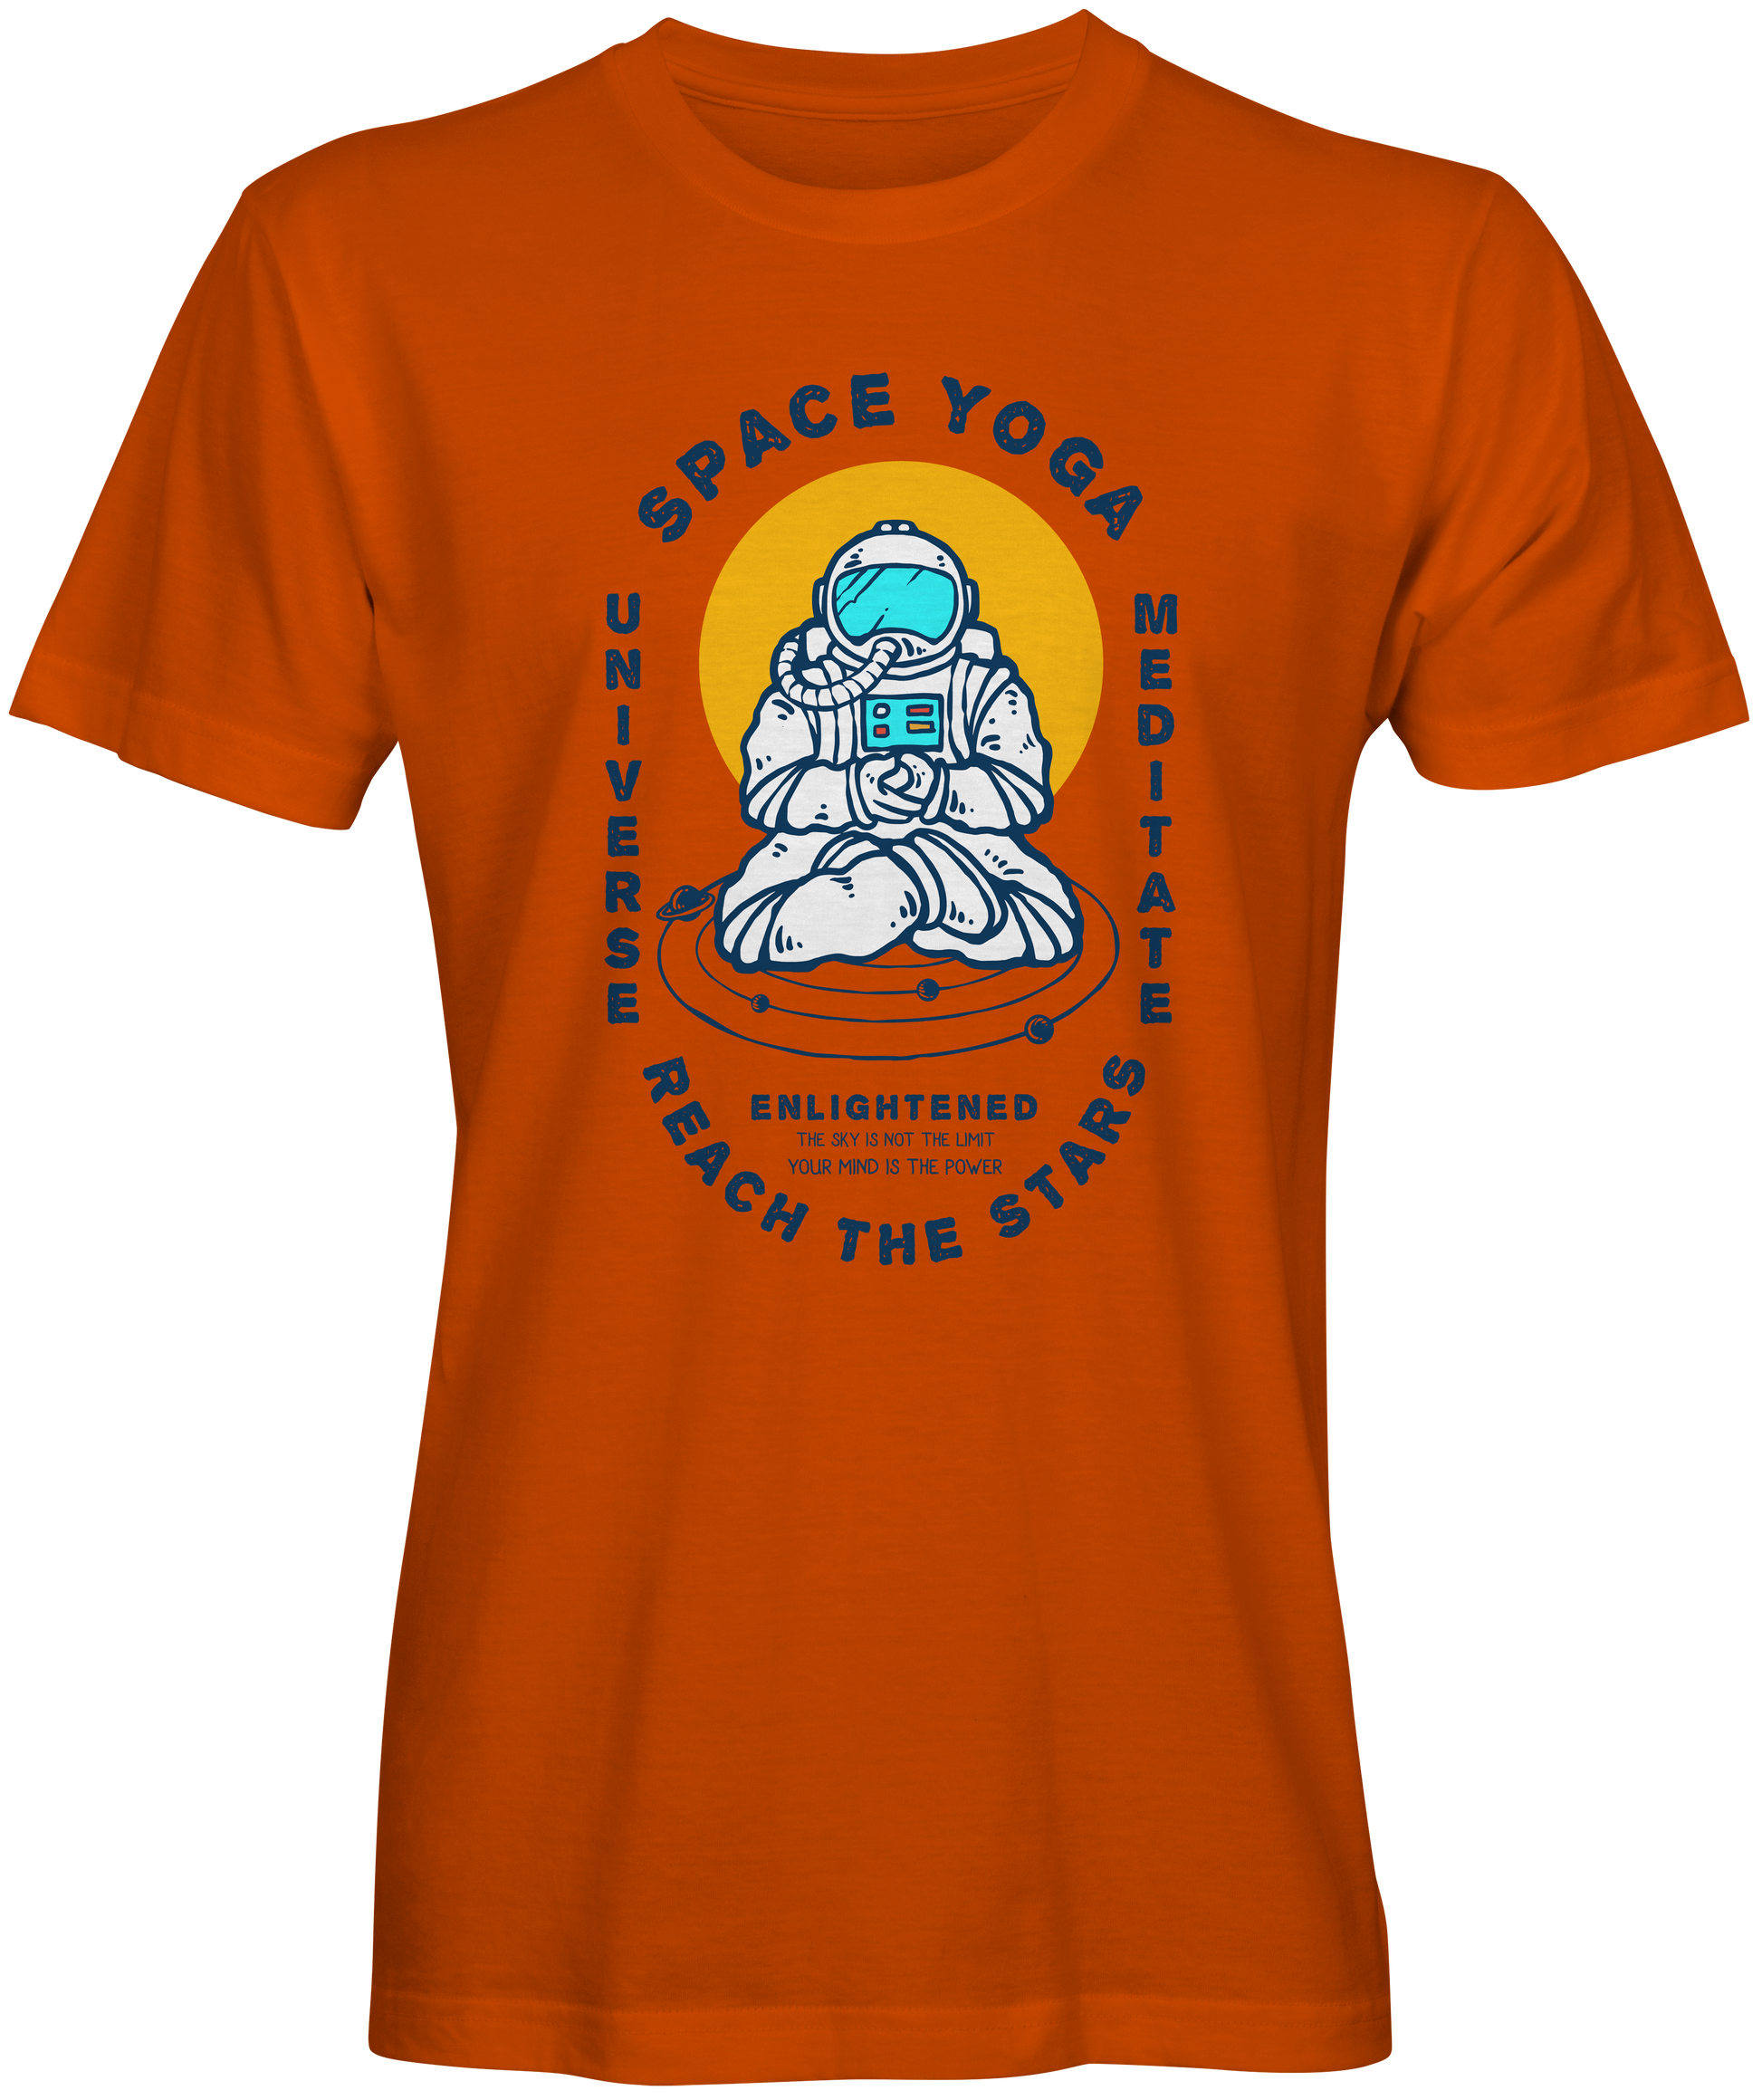 Space Yoga Inspired T-shirts